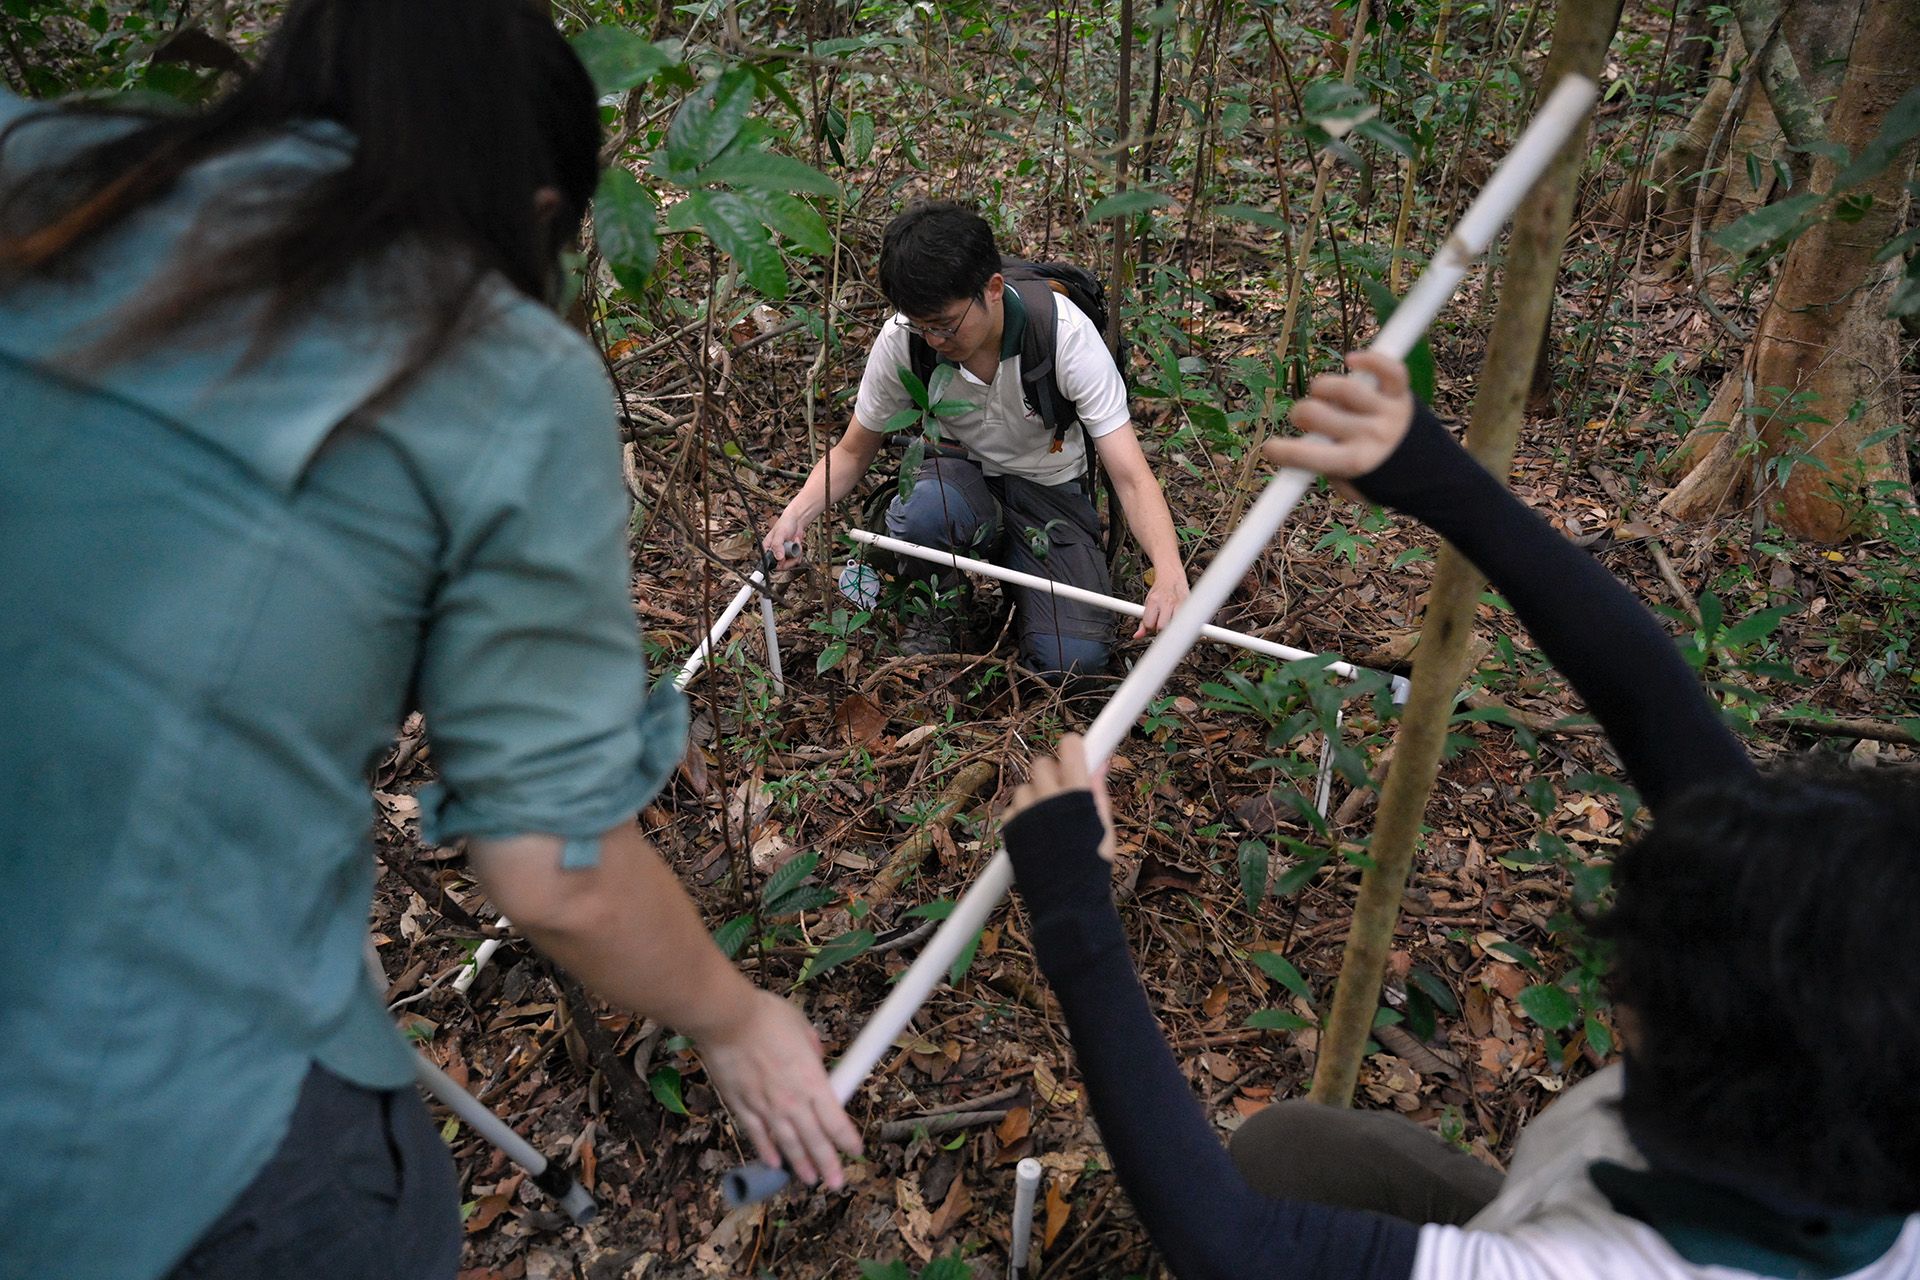 Ms Fung and Dr Chong, together with NParks researcher Lim Yi He, using plastic poles to demarcate a 1m by 1m quadrant in which all tree seedlings above 20cm tall are identified and measured.